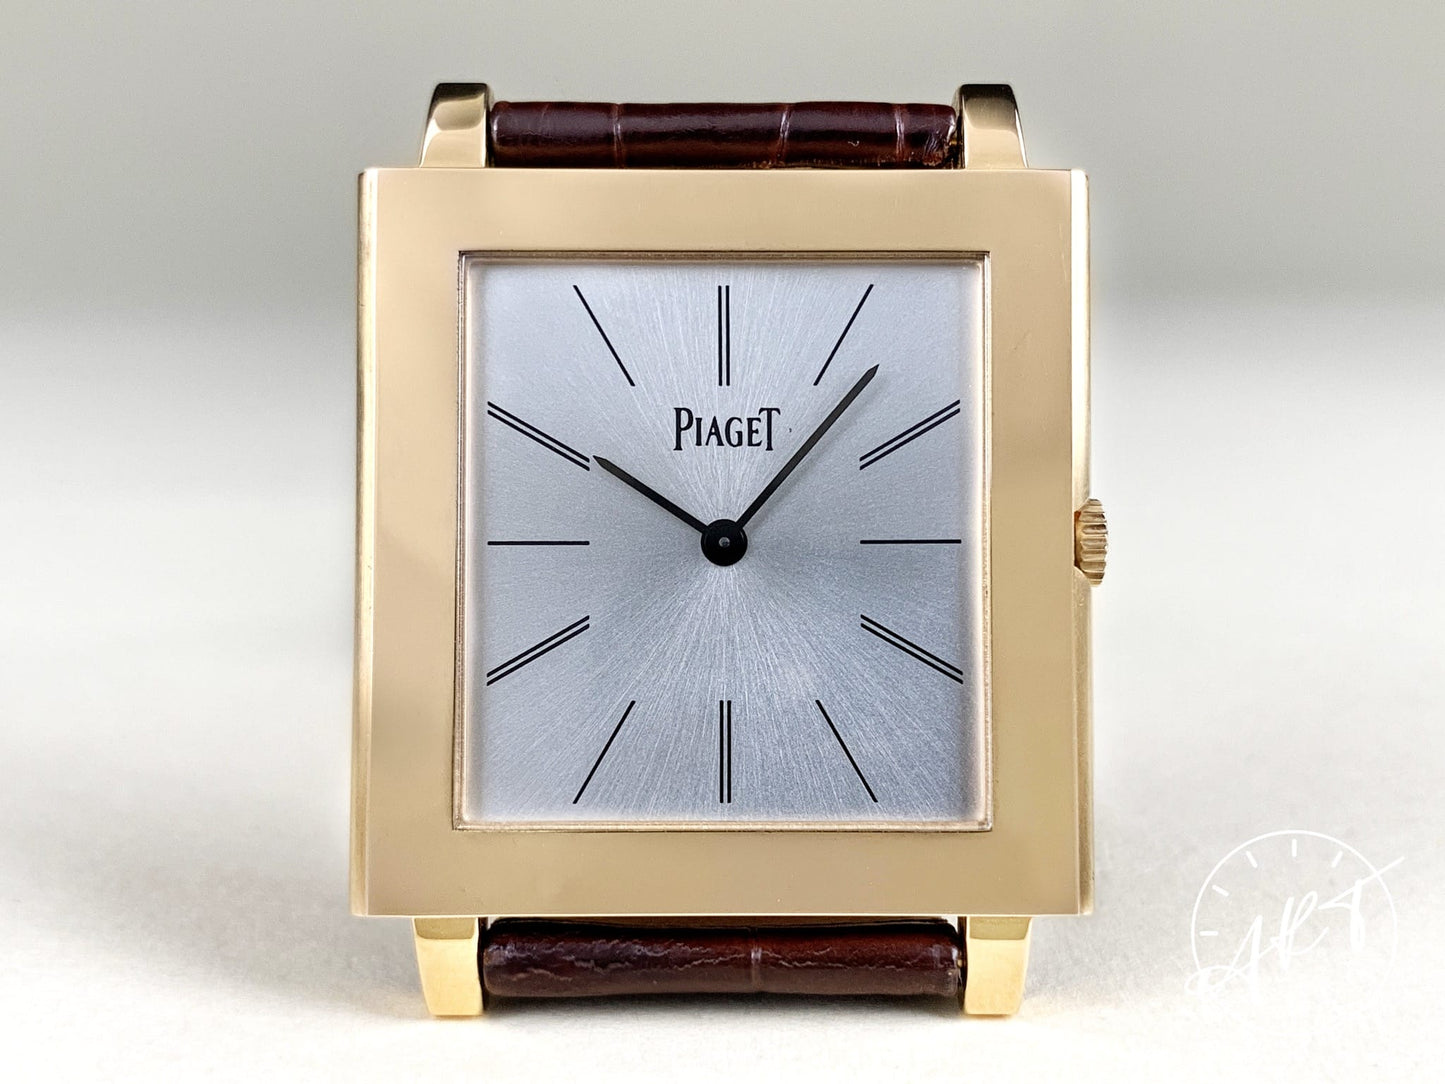 Piaget Altiplano Ultra-Thin Silver Dial 18K Rose Gold Manual Wind Watch G0A32065